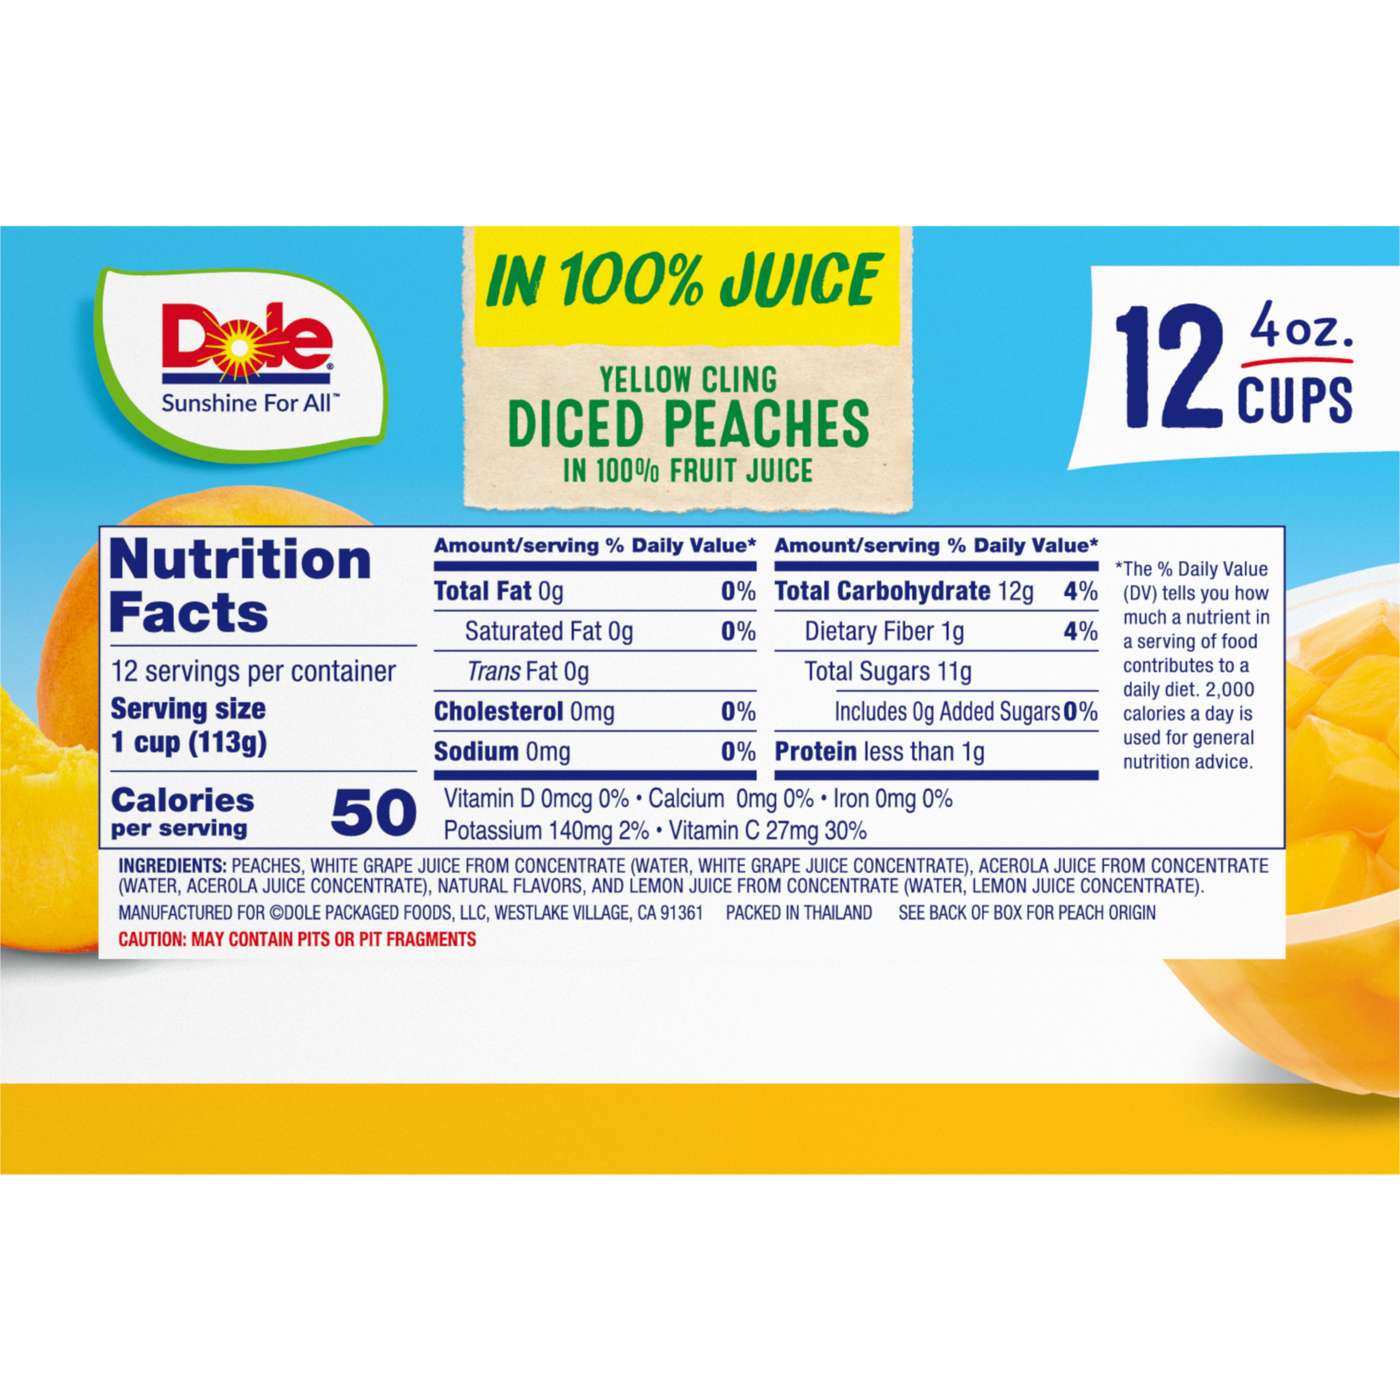 Dole Fruit Bowls - Diced Peaches in 100% Juice; image 3 of 8